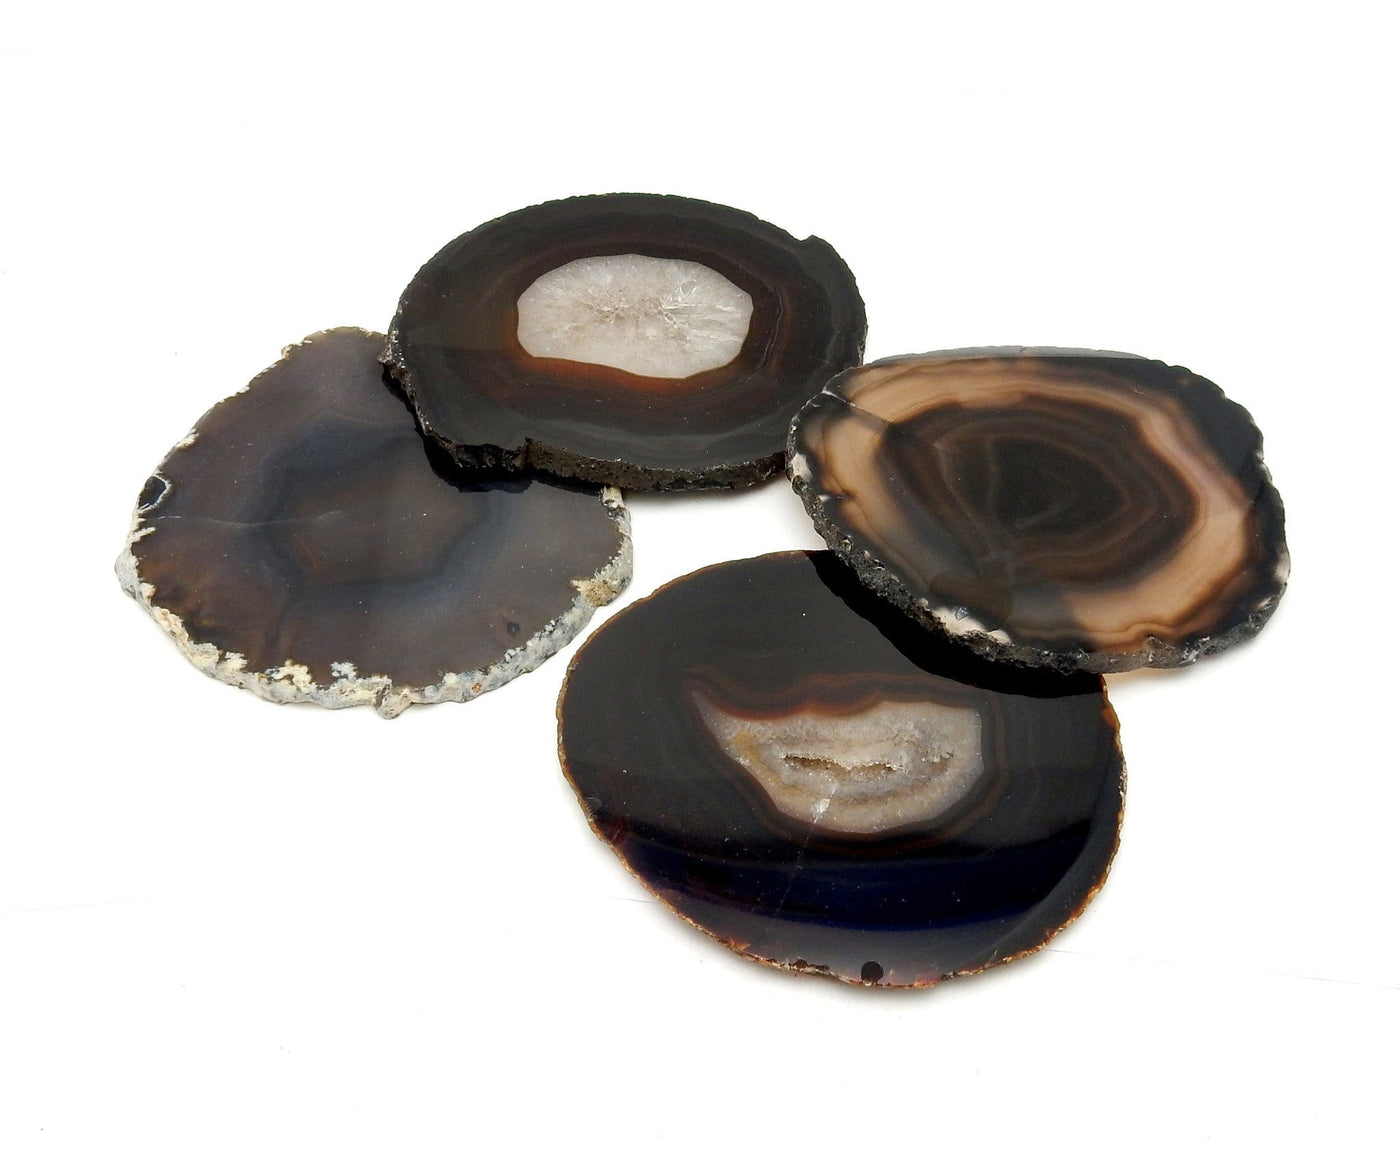 4 Black Agate Coaster spread out in white background